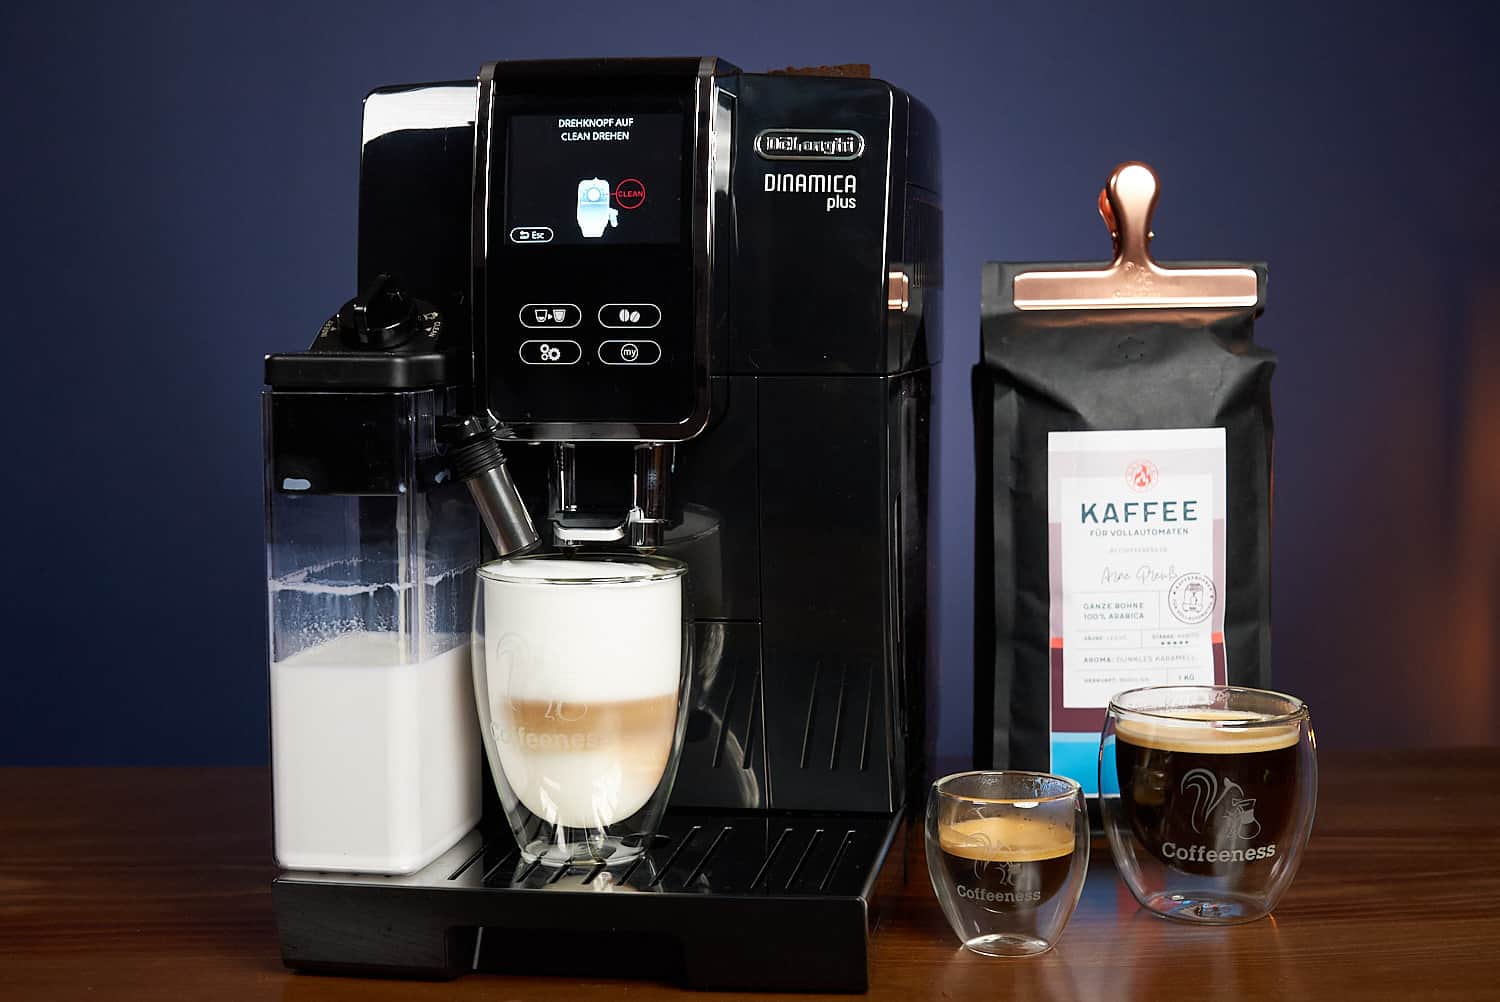 The best bean-to-cup coffee machine 2024